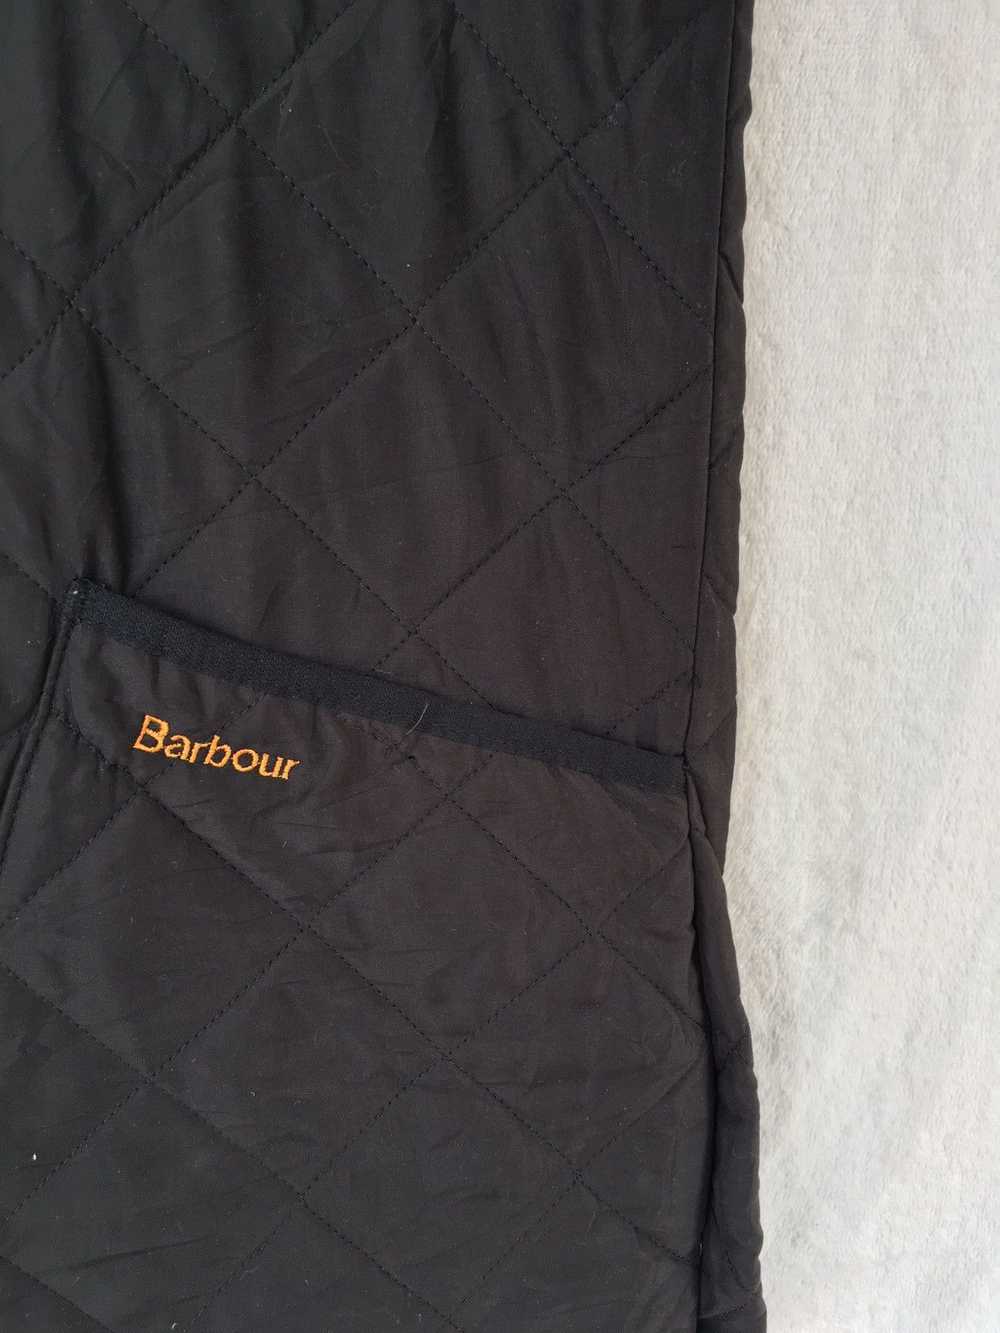 Barbour quilted jacket - image 7